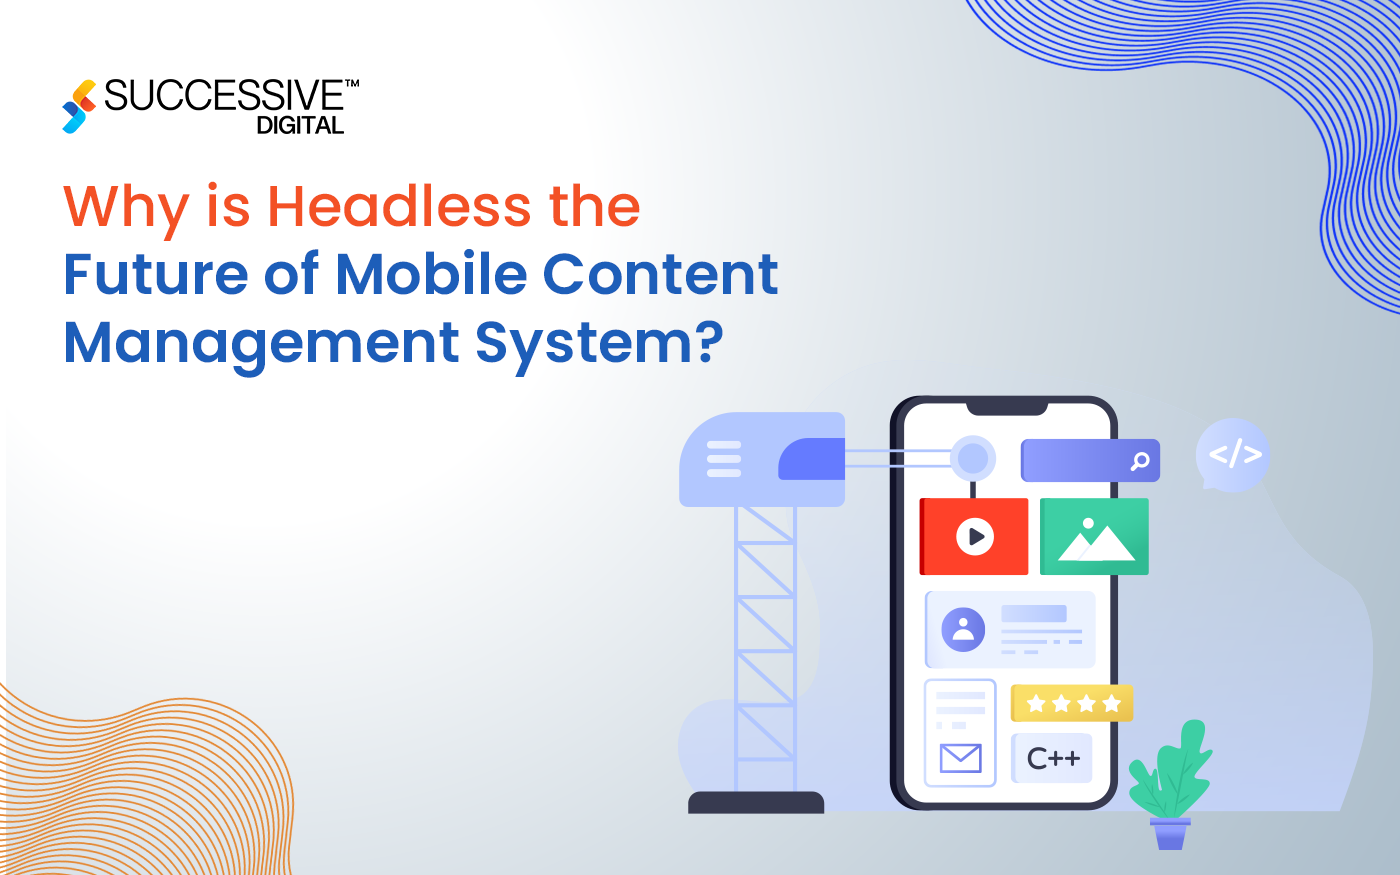 Why is Headless the Future of Mobile Content Management System?